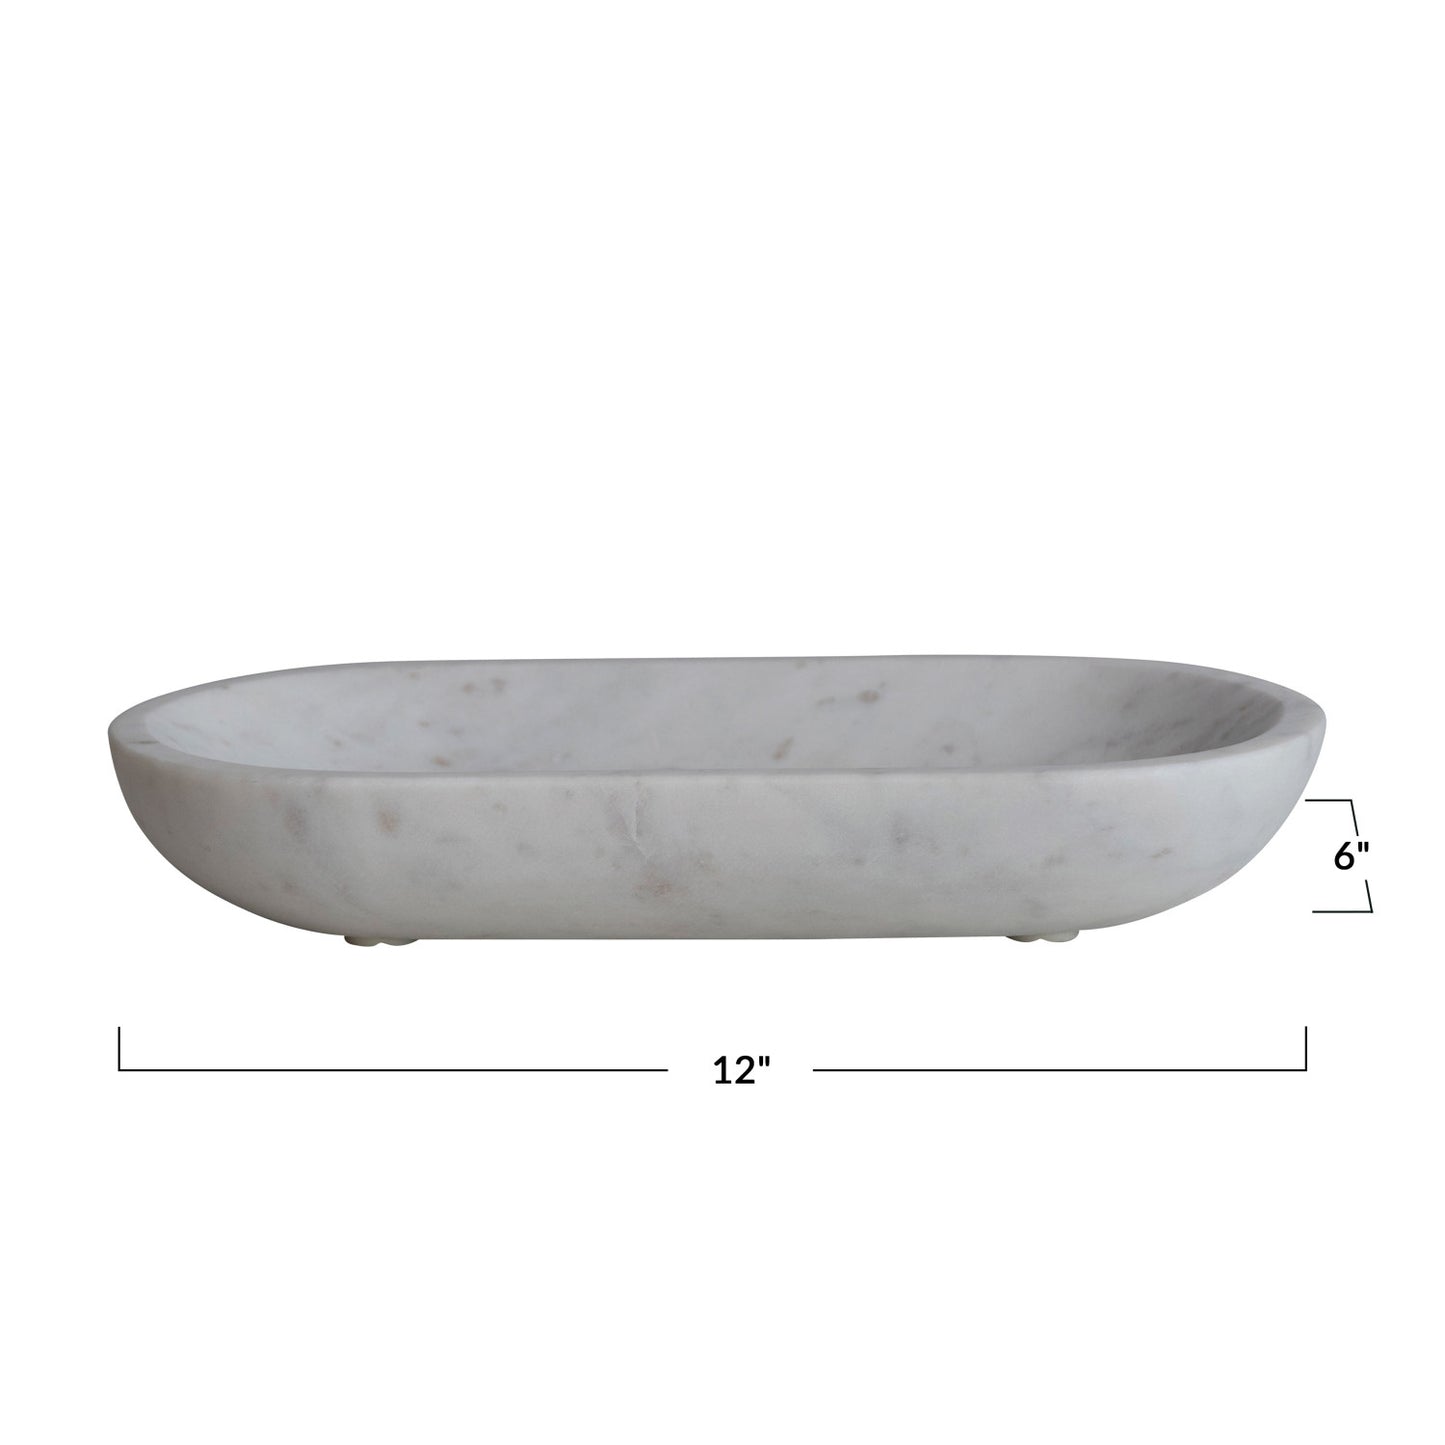 Oval Marble Bowl, White